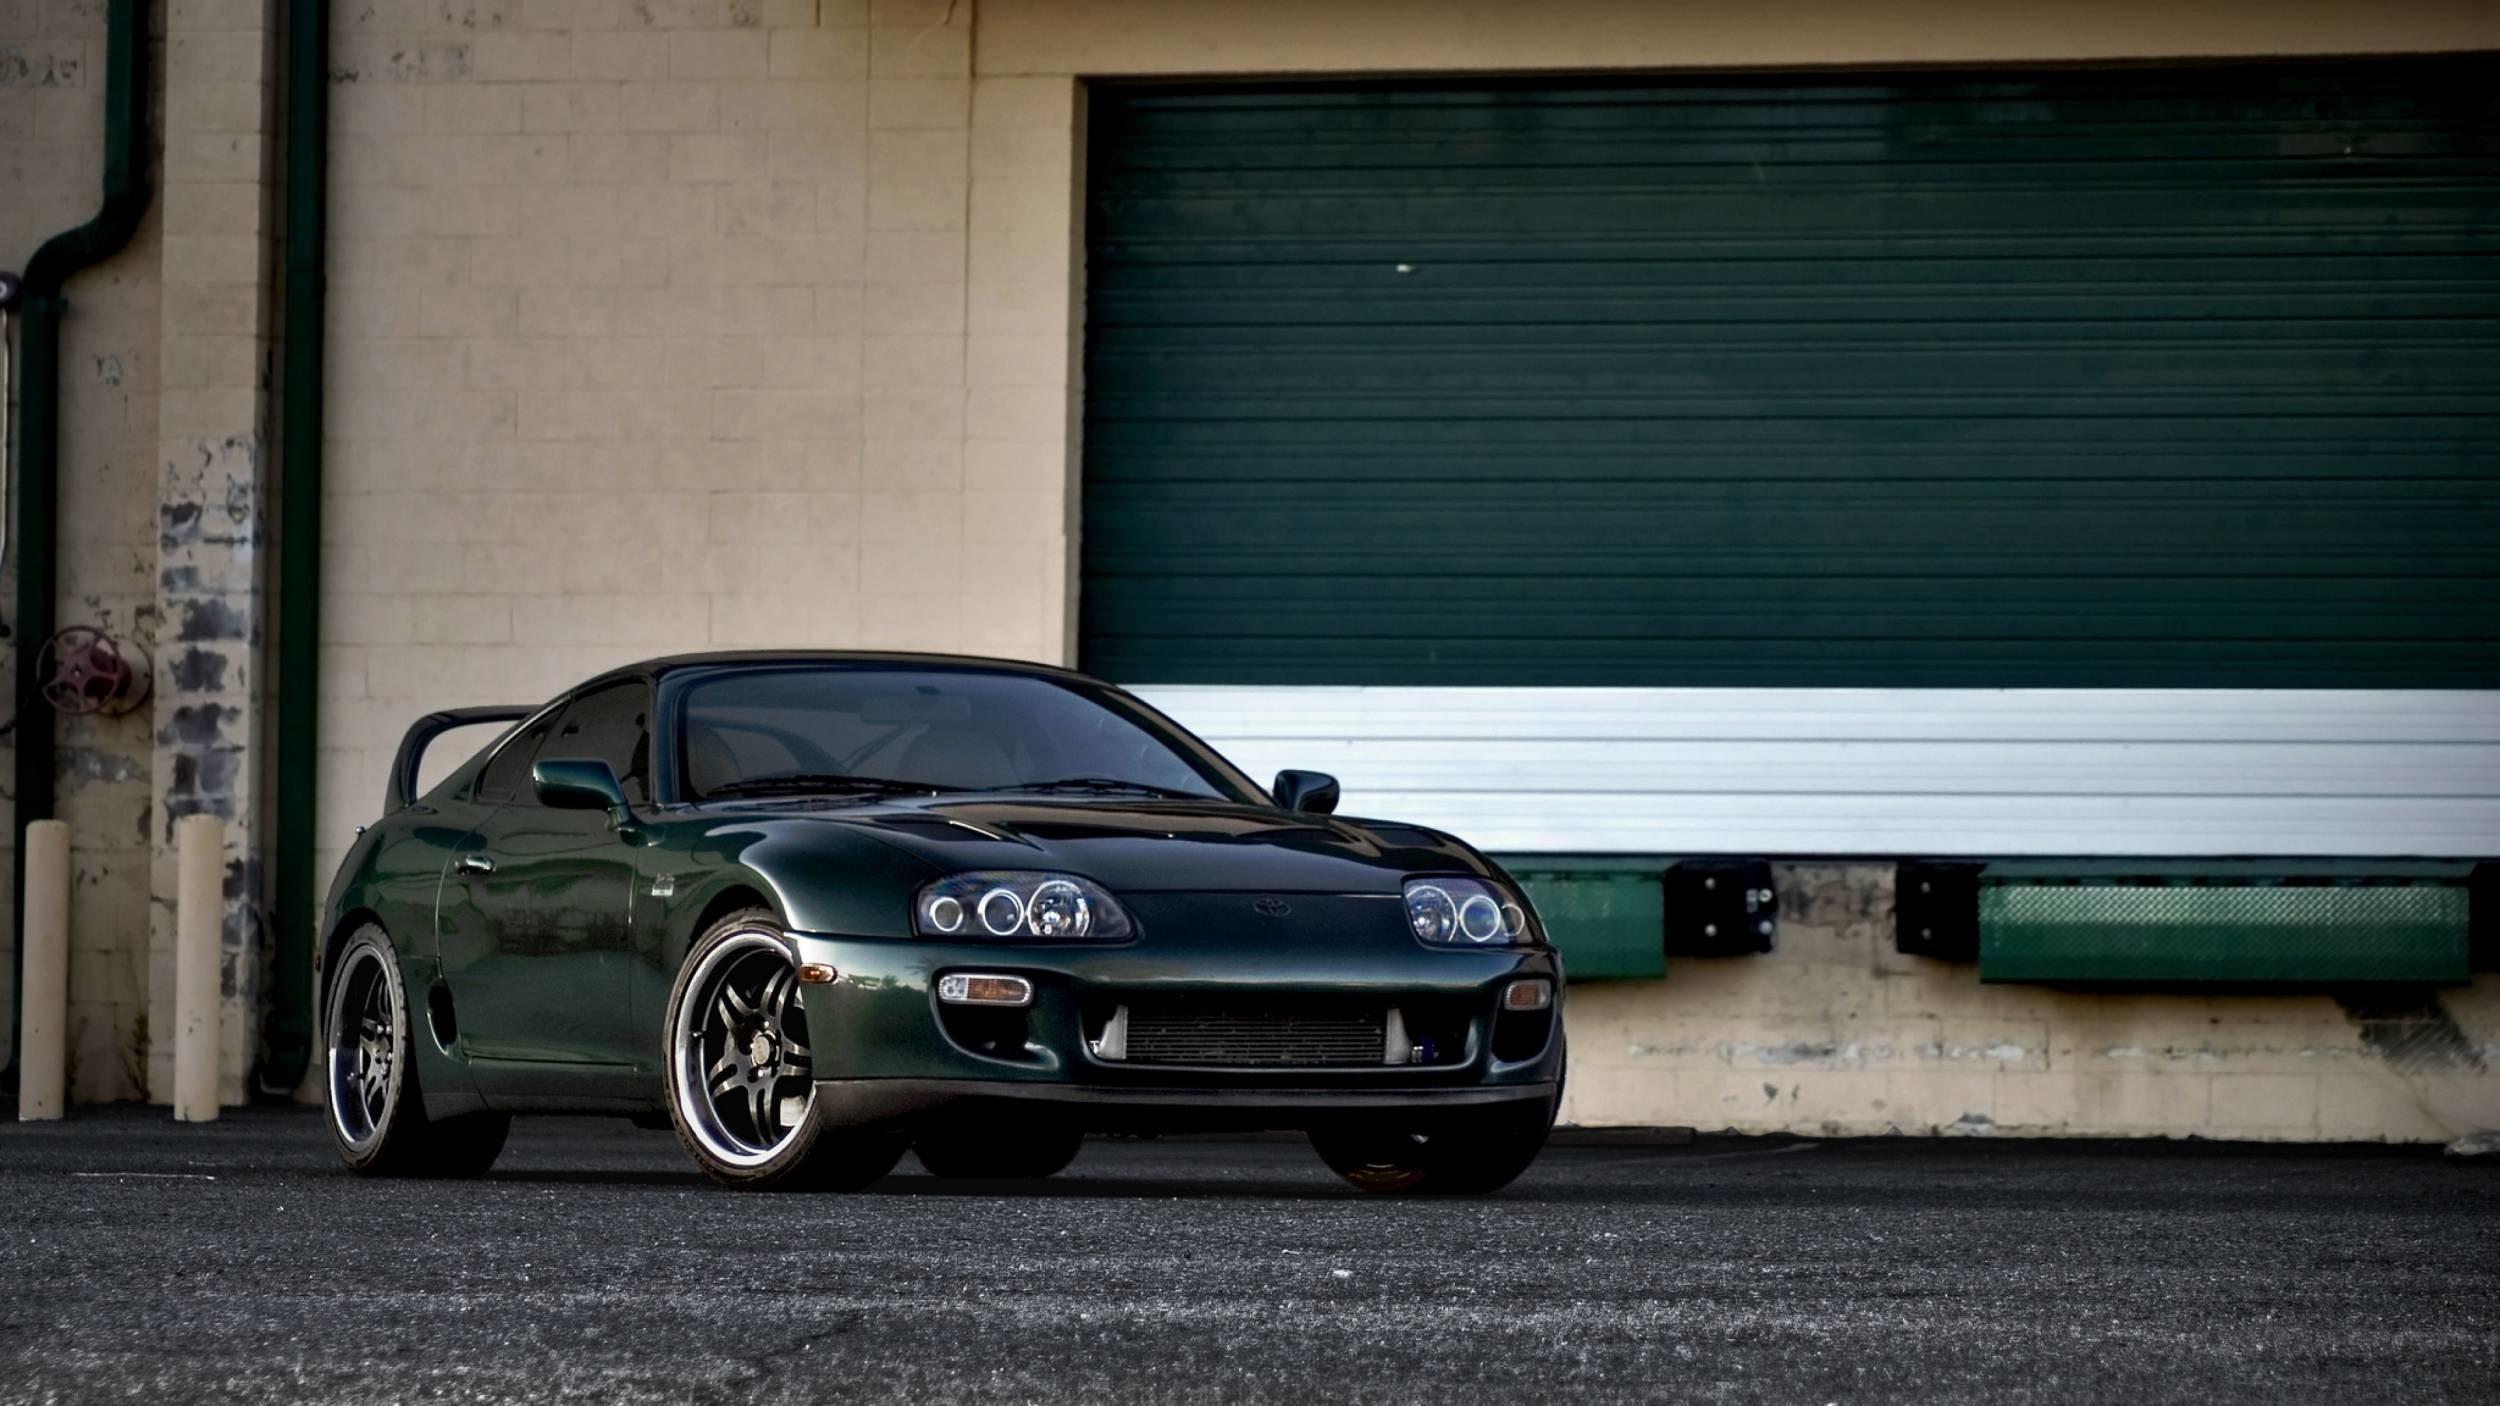 toyota supra 1080P 2k 4k Full HD Wallpapers Backgrounds Free Download   Wallpaper Crafter